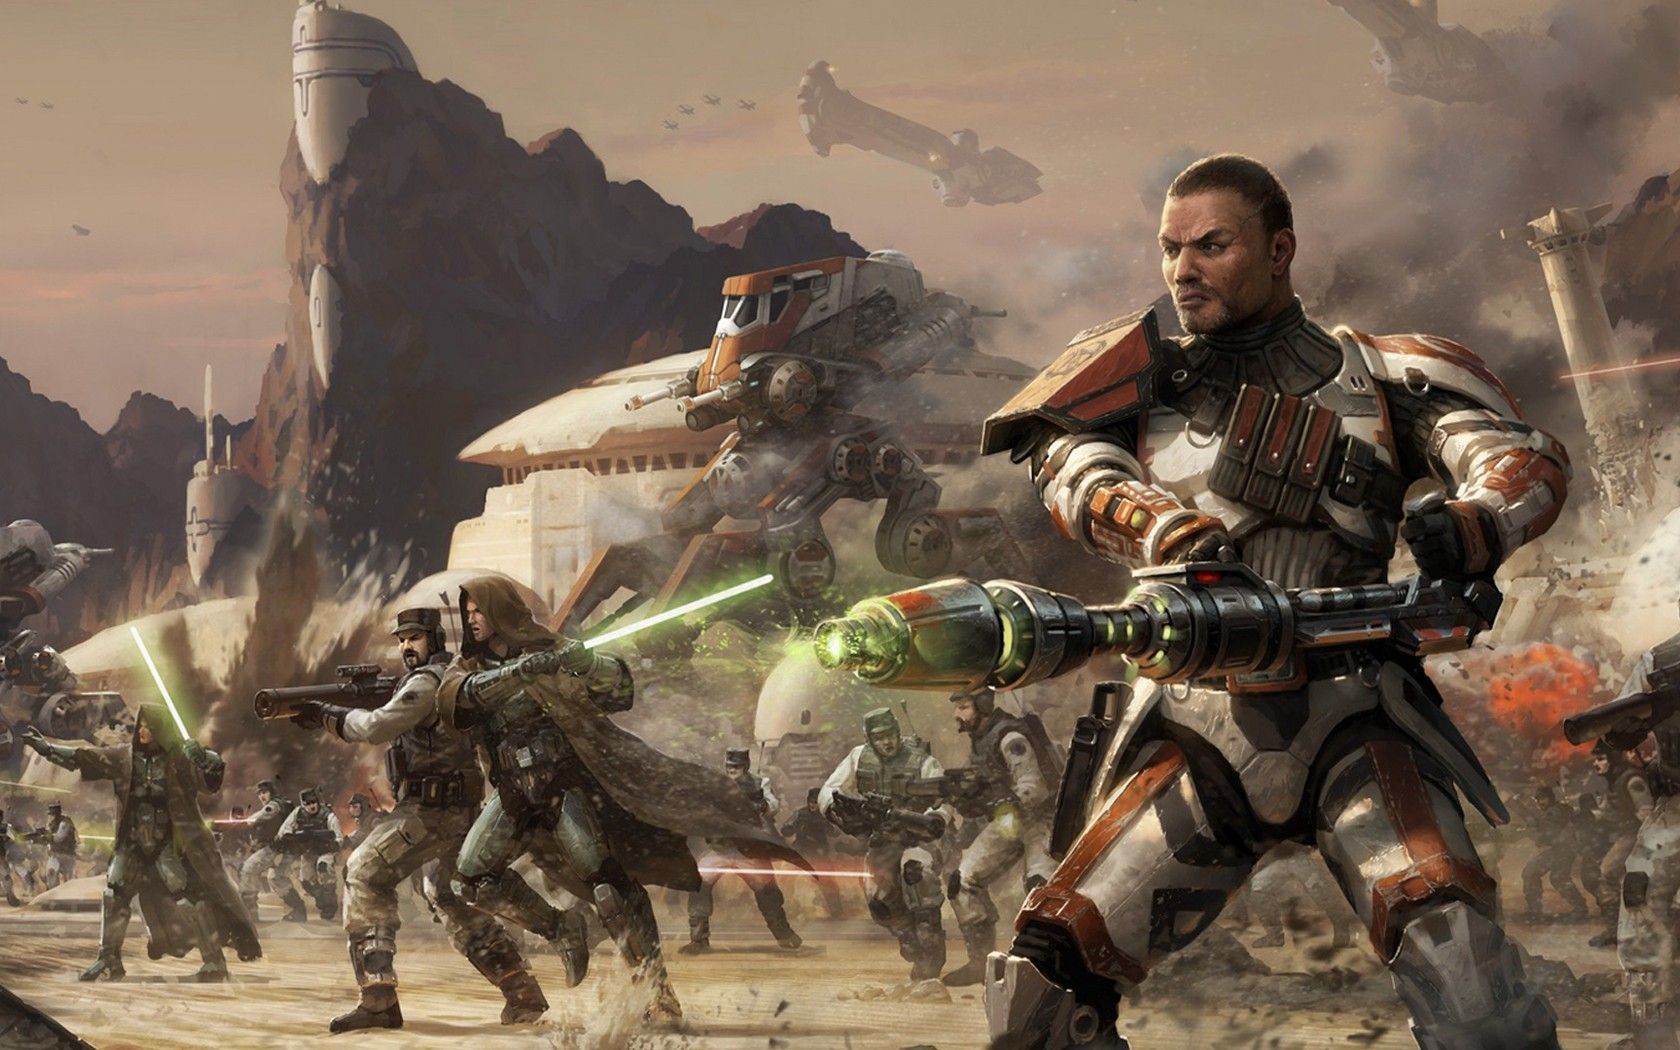 Star Wars: The Old Republic. Star wars picture, Star wars image